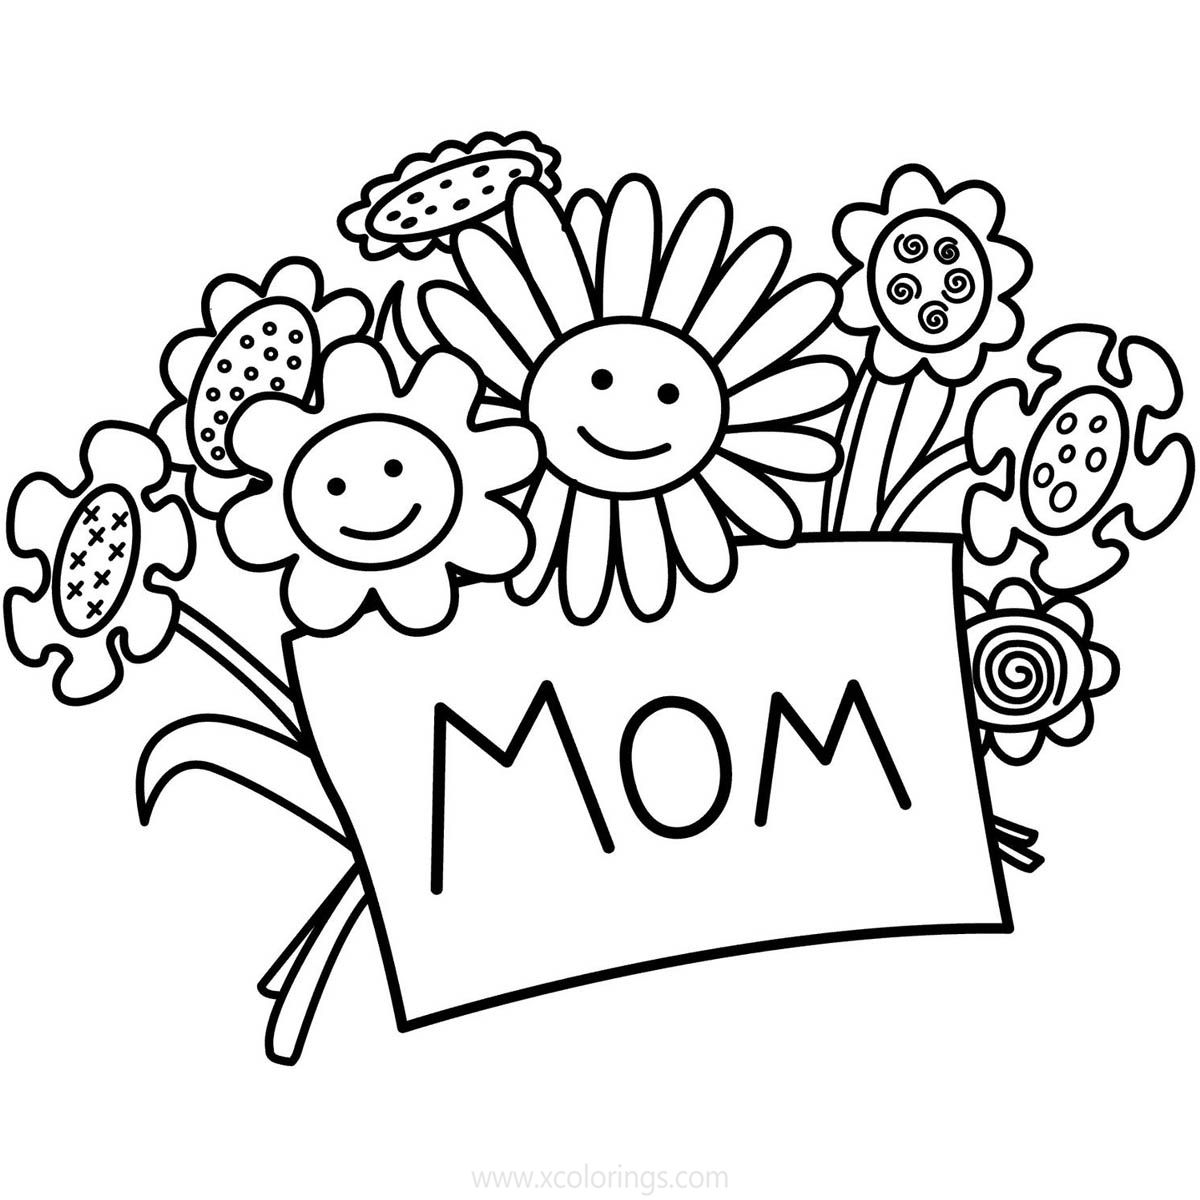 Free Mother's Day Coloring Pages for Preschoolers printable